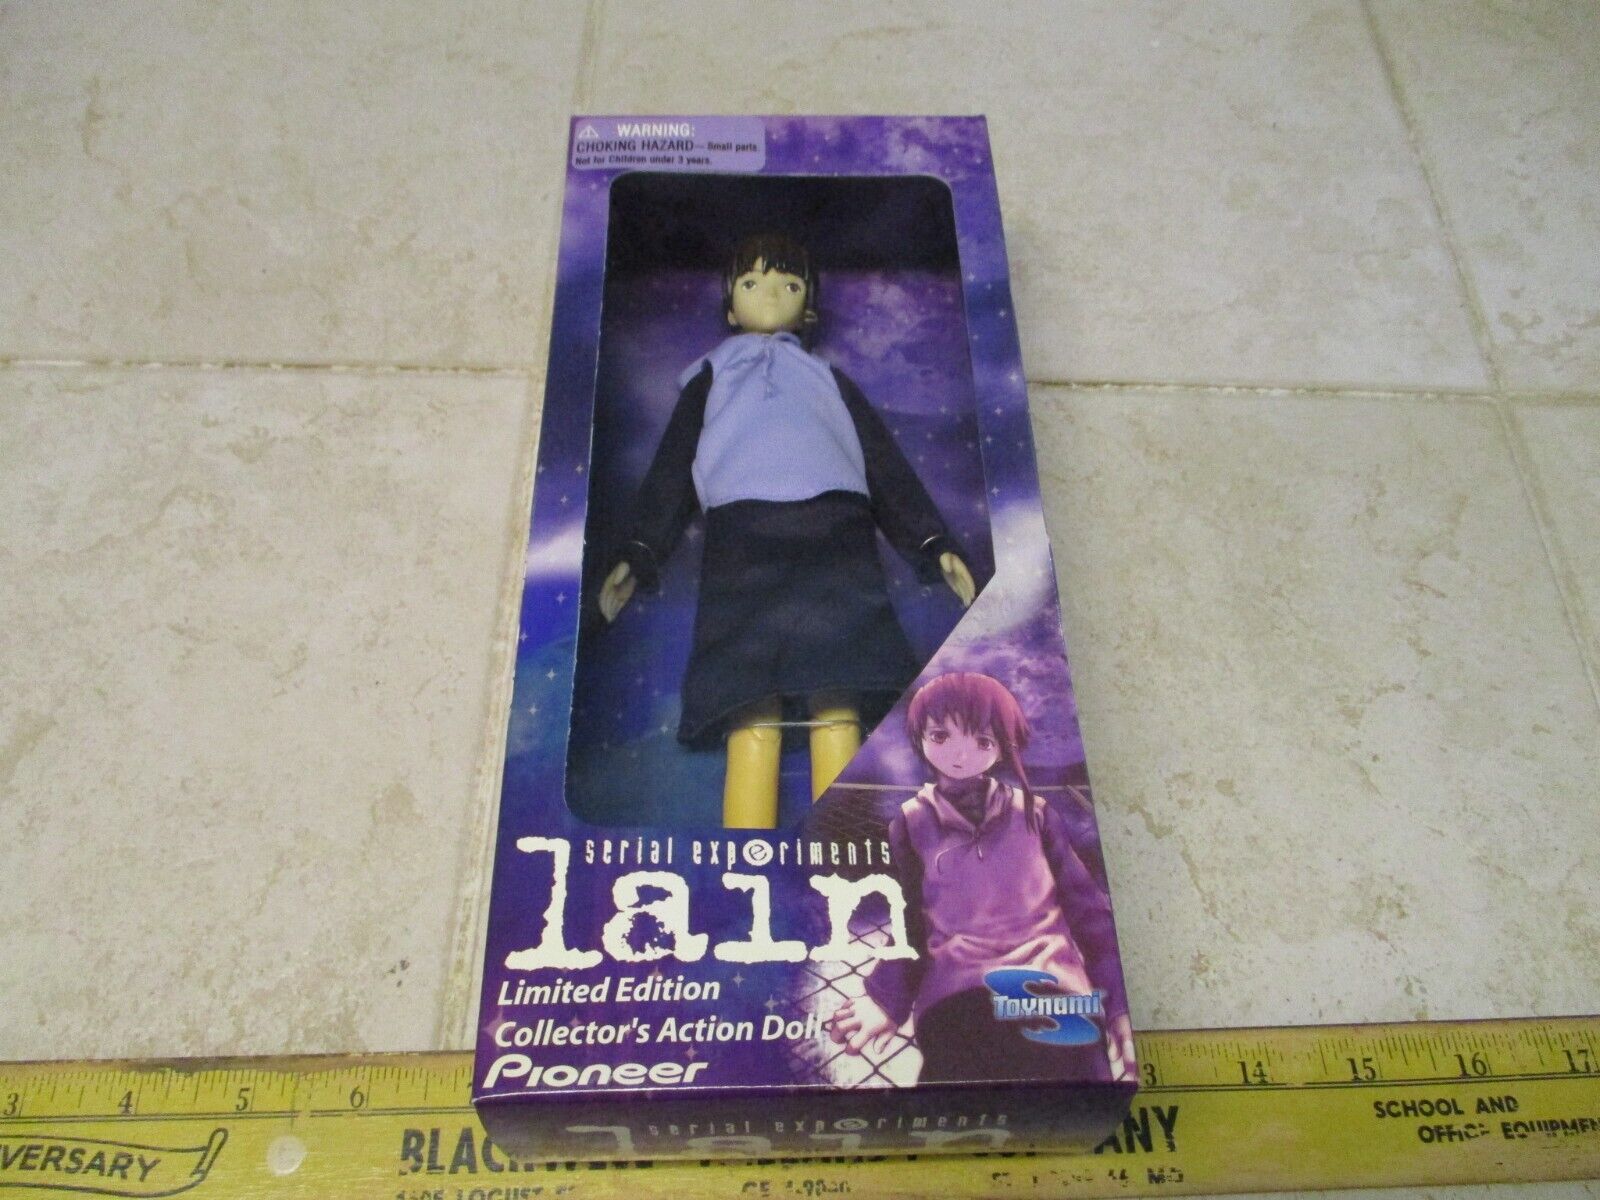 Serial Experiments Lain Urban Outfit Collector\'s Action Figure Doll - NIB LE